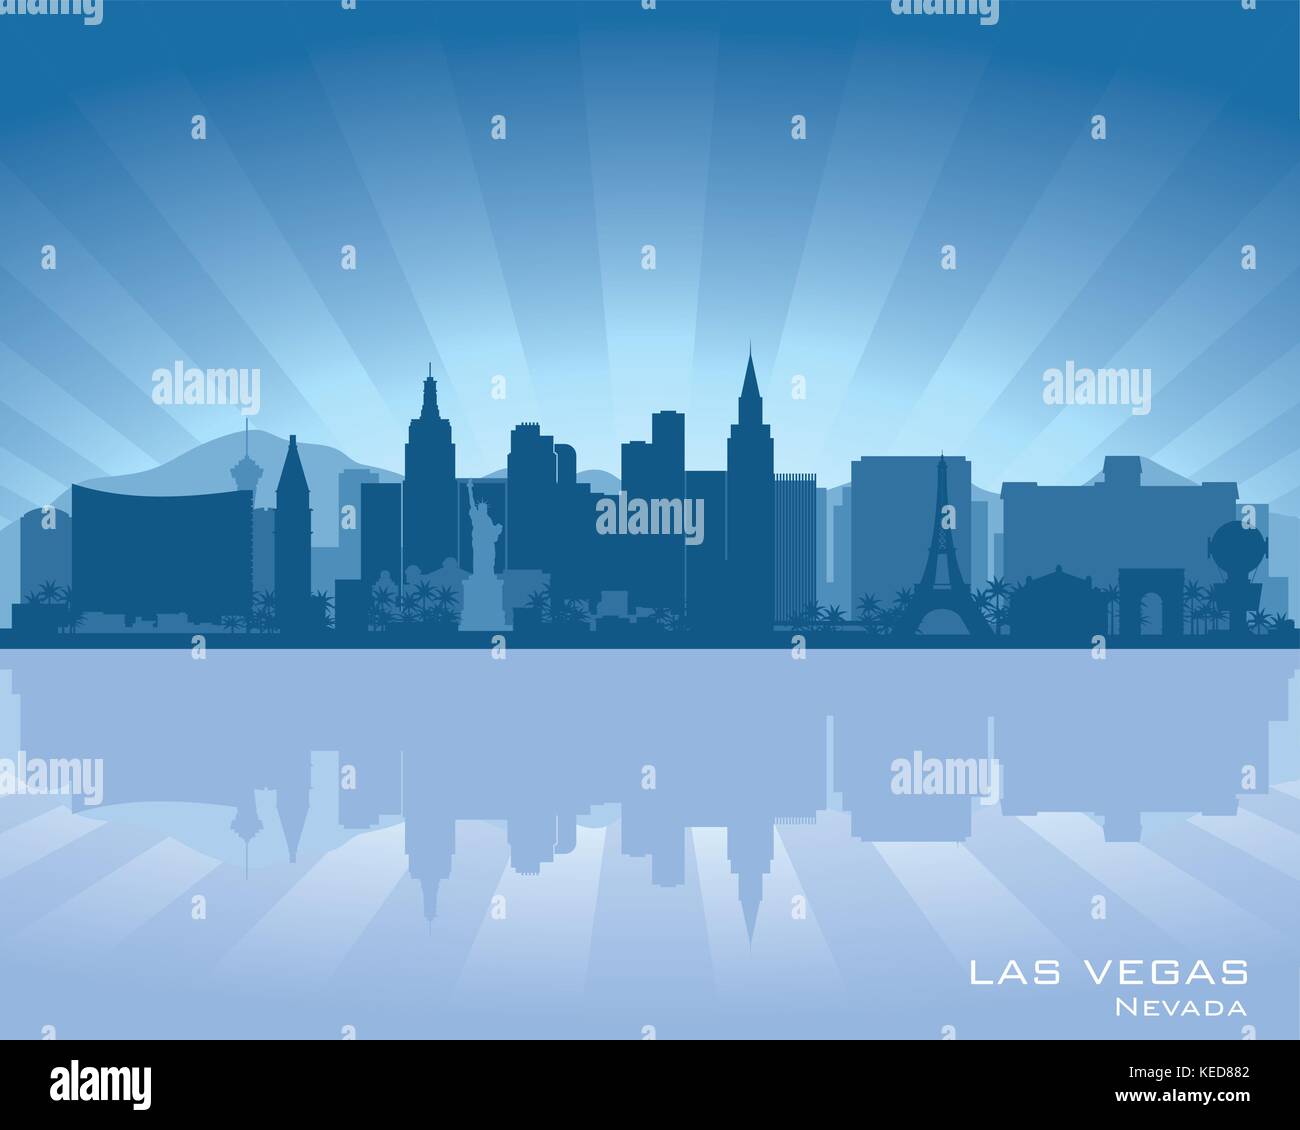 Las Vegas, Nevada skyline illustration with reflection in water Stock Vector